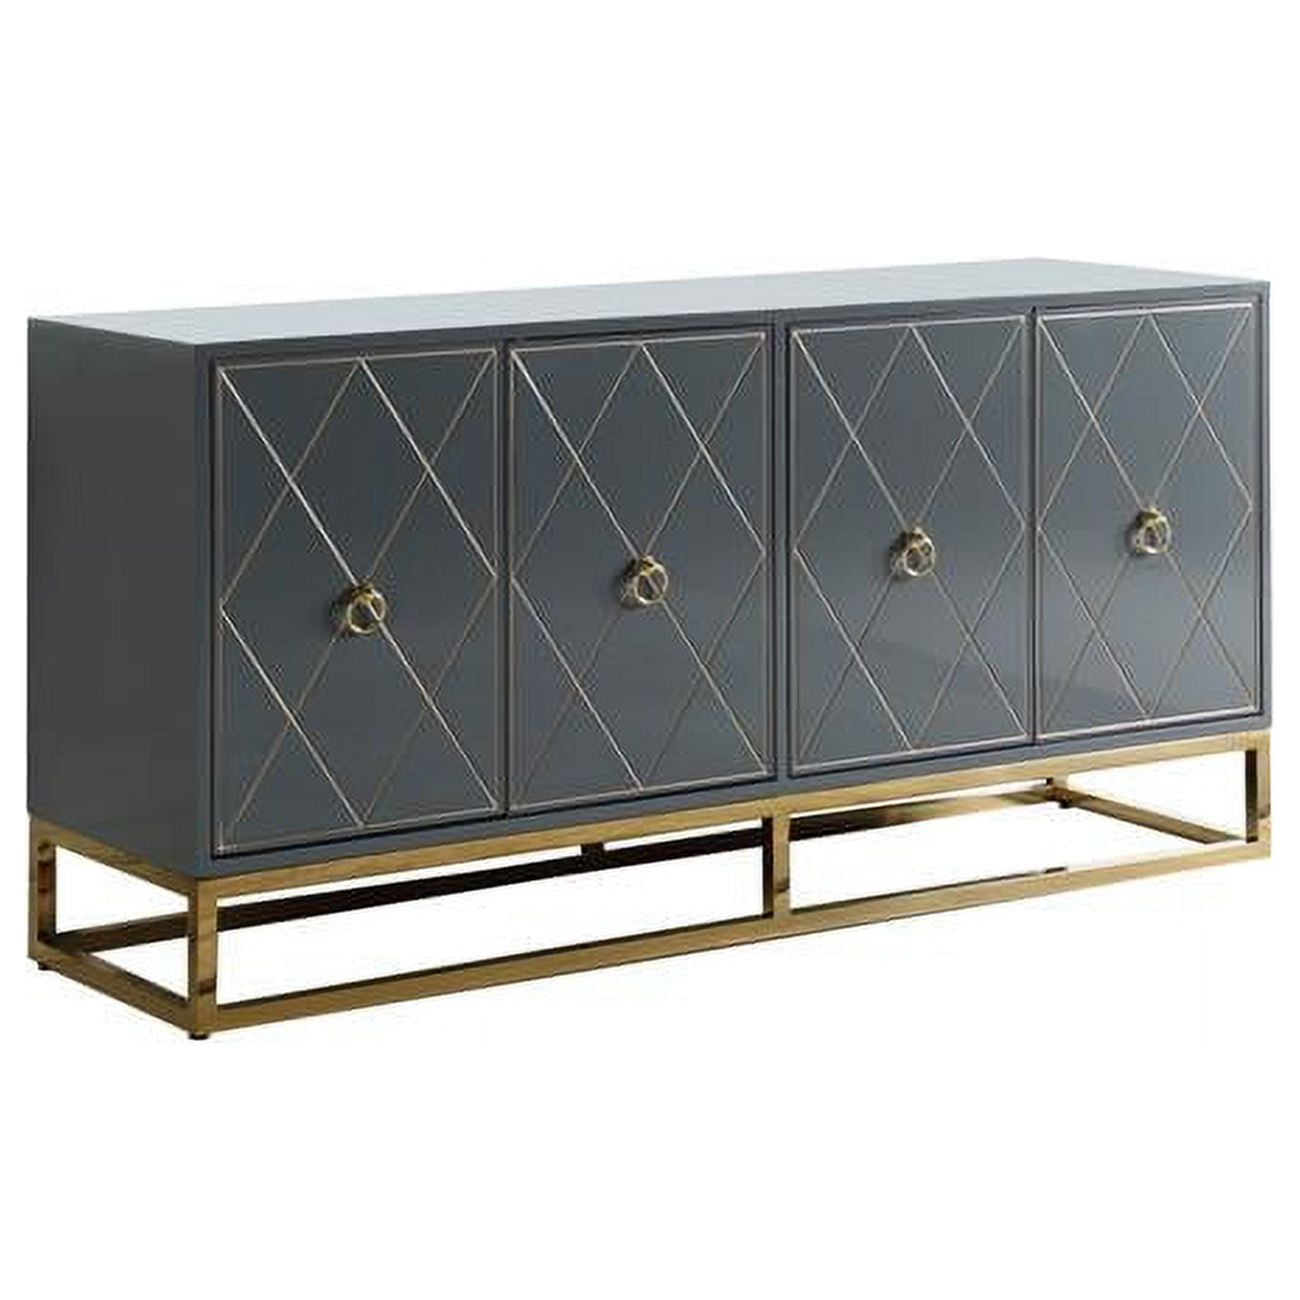 Picture of Best Master Furniture T1943 Grey Sideboard Senior Grey Lacquer With Gold Plated Sideboard